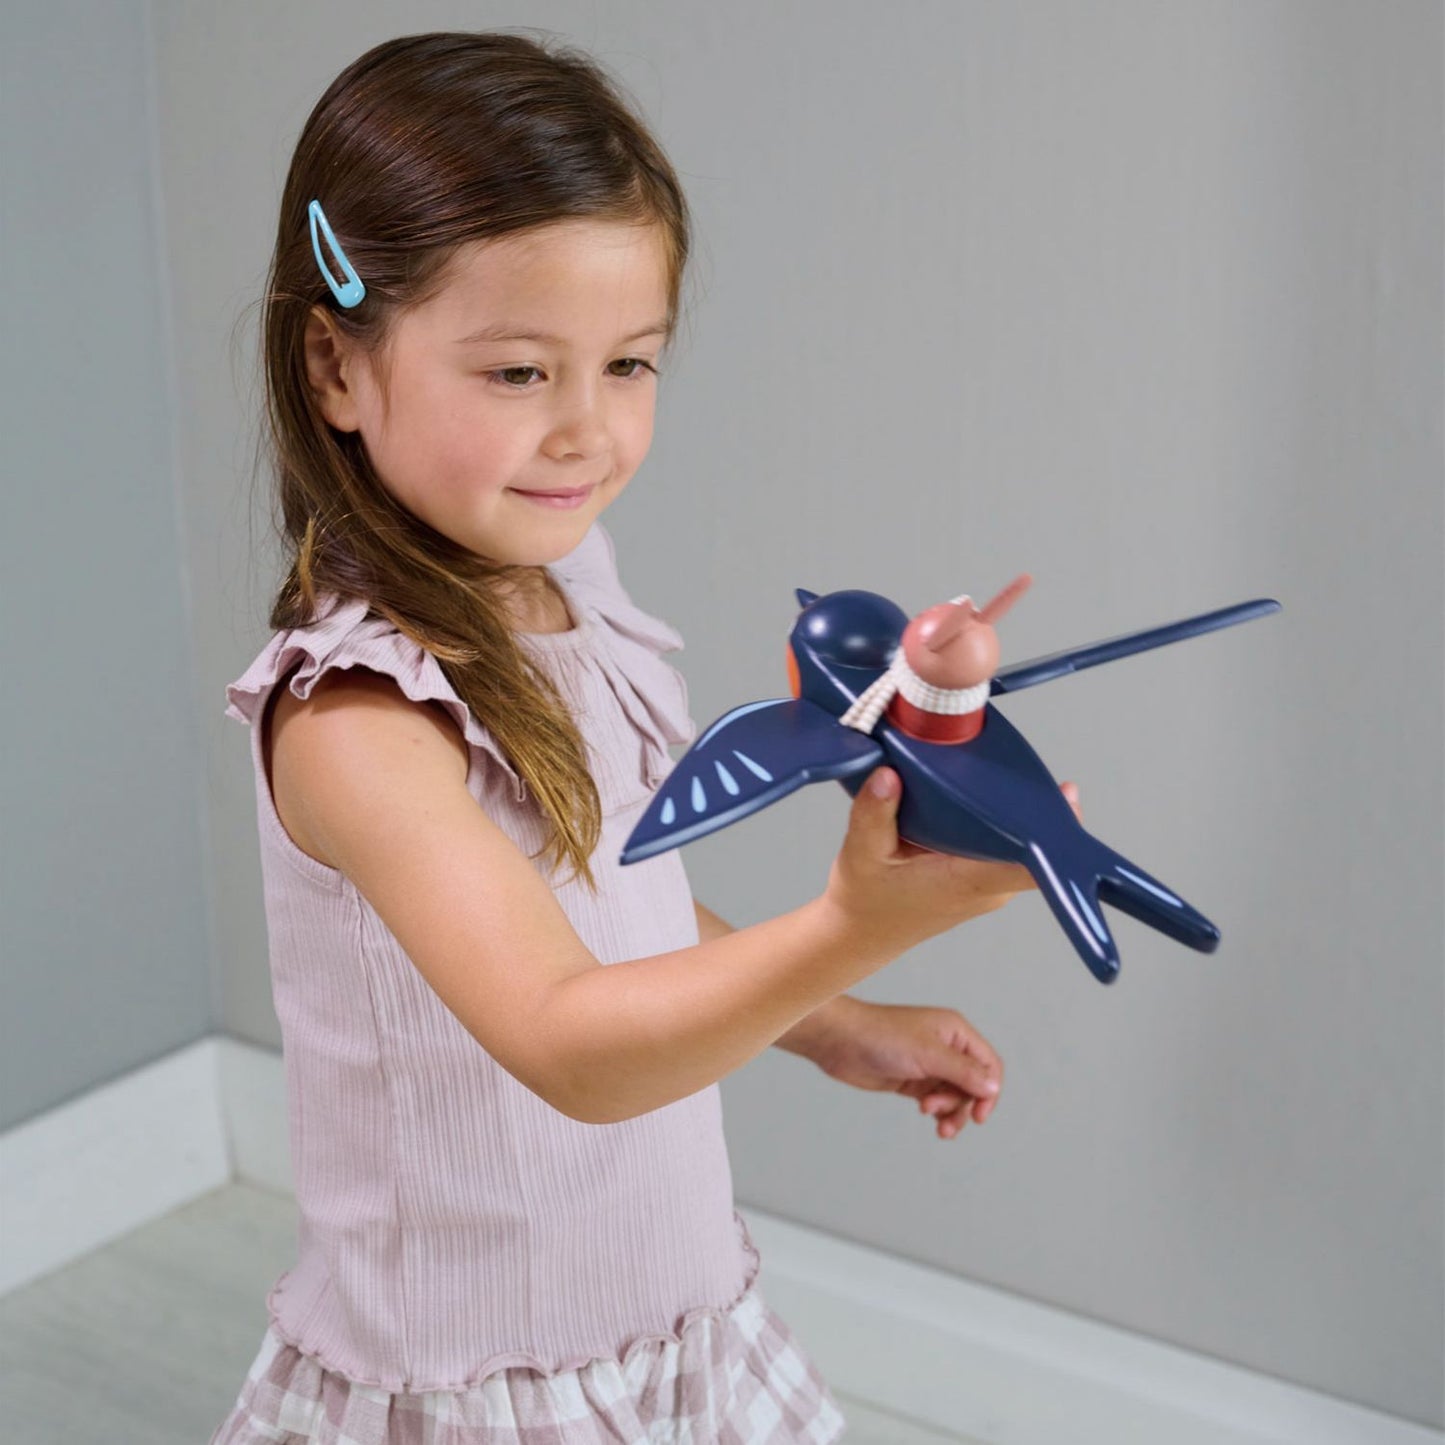 Swifty Bird | Wooden Toy Play Set For Kids